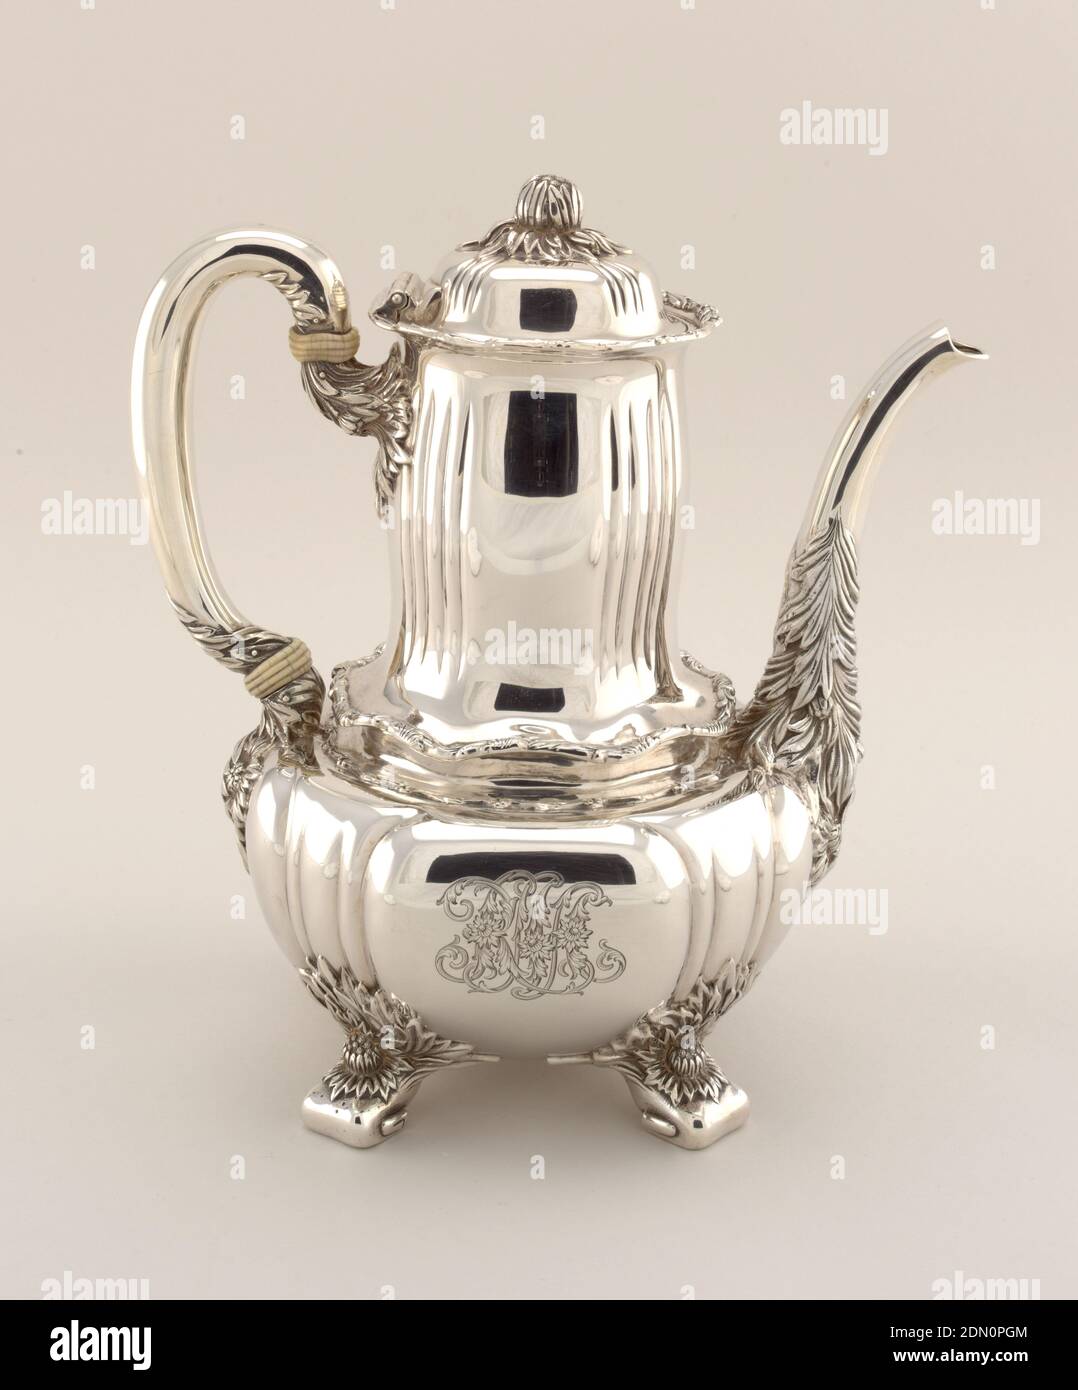 Chrysanthemum, Tiffany & Company, American, established 1853, Silver, ivory, Reeded globular body, engraved with foliate monogram 'RMA', rising to tall slightly bulging cylindrical neck with wavy rim; loop handle with ivory insulators on one side, and long curved spout heavily decorated with chrysanthemums and foliage opposite; base with four foliate feet. Slightly domed and reeded lid with flower bud knop., New York, New York, USA, 1891–1902, metalwork, Decorative Arts, coffeepot, coffeepot Stock Photo